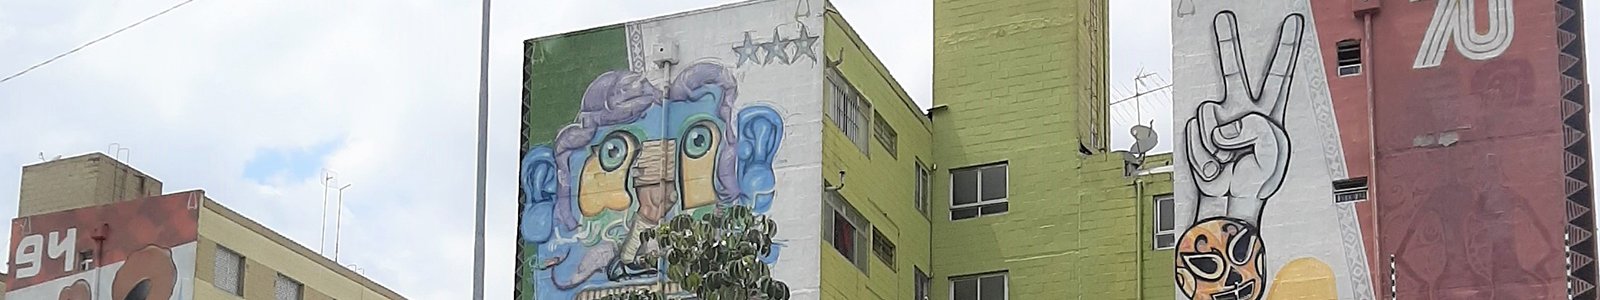 Three murals in a row, each painted high on the side of buildings; key images include a colourful abstract face and a hand making a peace sign.